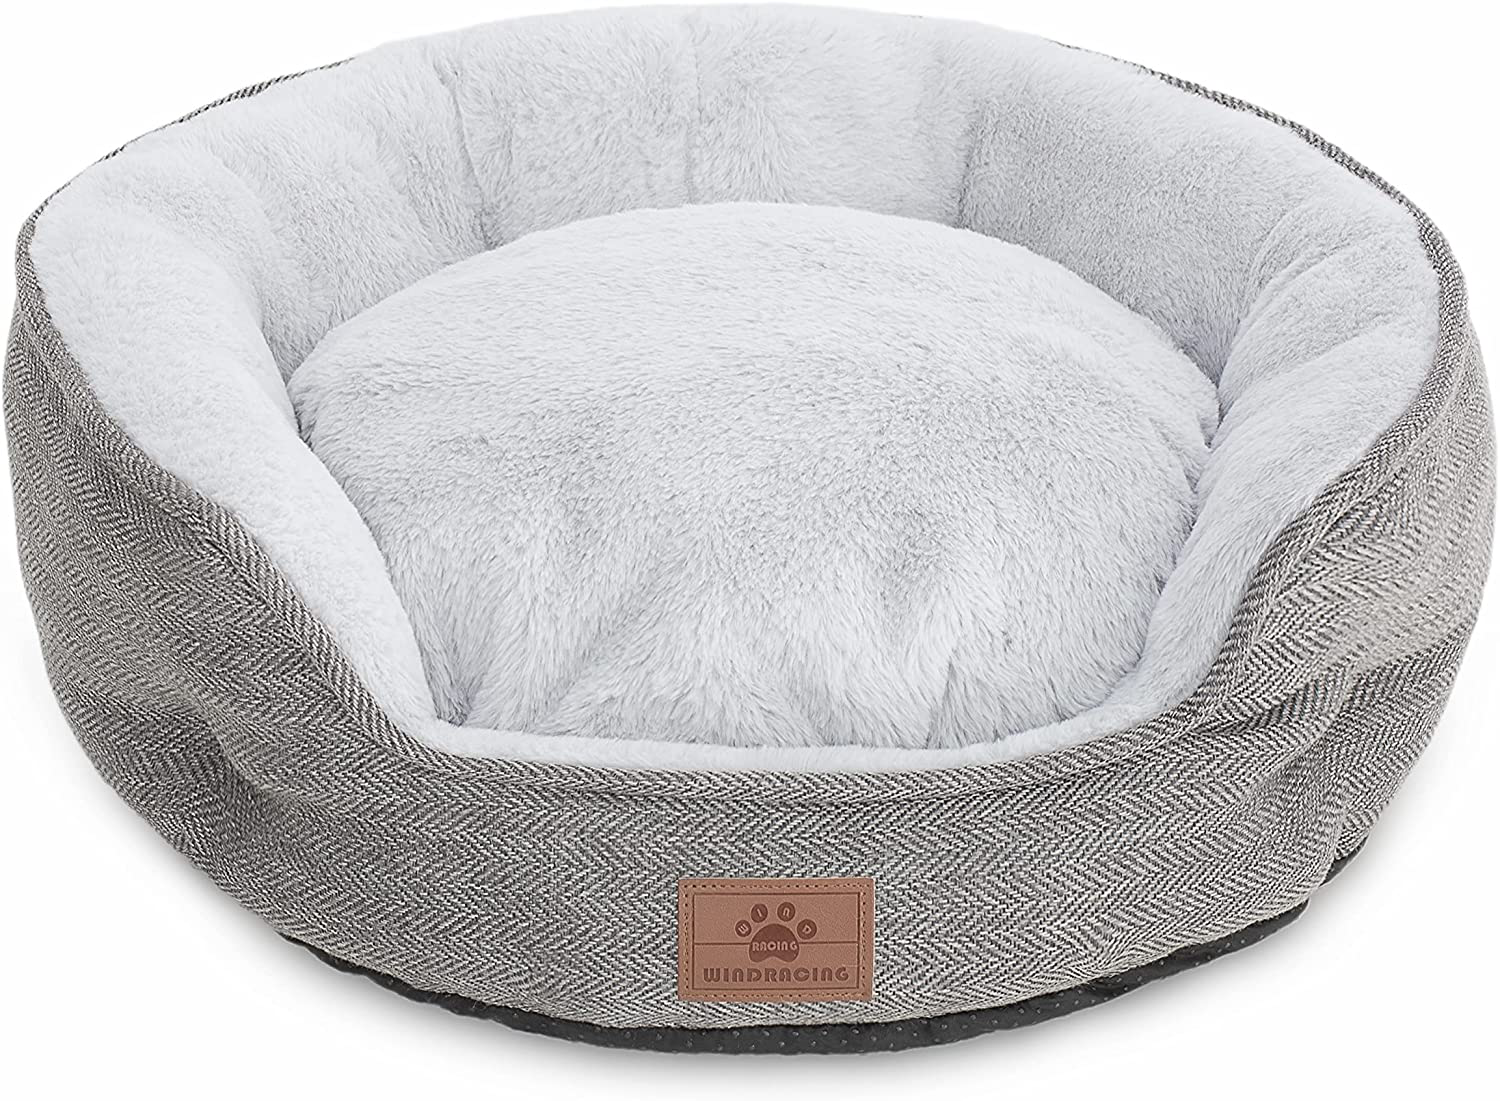 Cat Beds for Indoor Cats,Small Dog Bed,Cuddler Dog Beds,Calming Dog Bed Donut,Soft Anxiety Cozy Pet Beds,Puppy Bed for Small/Medium Dogs Washable round in Beige Color,Windracing PET Animals & Pet Supplies > Pet Supplies > Cat Supplies > Cat Furniture WINDRACING Grey - Oval Cat Bed Small 